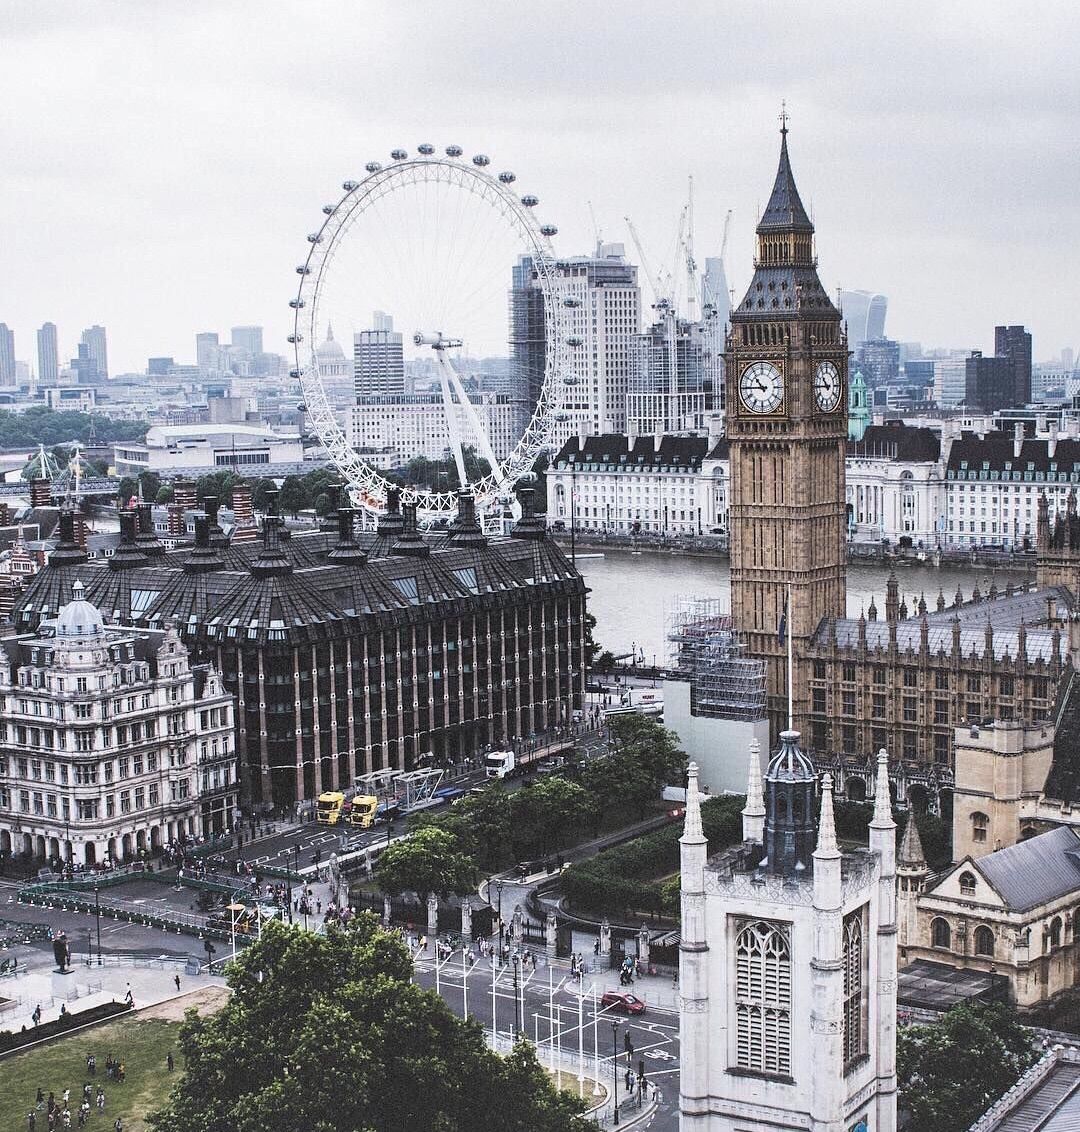 A city with a large clock tower, river, and a Ferris wheel. - London